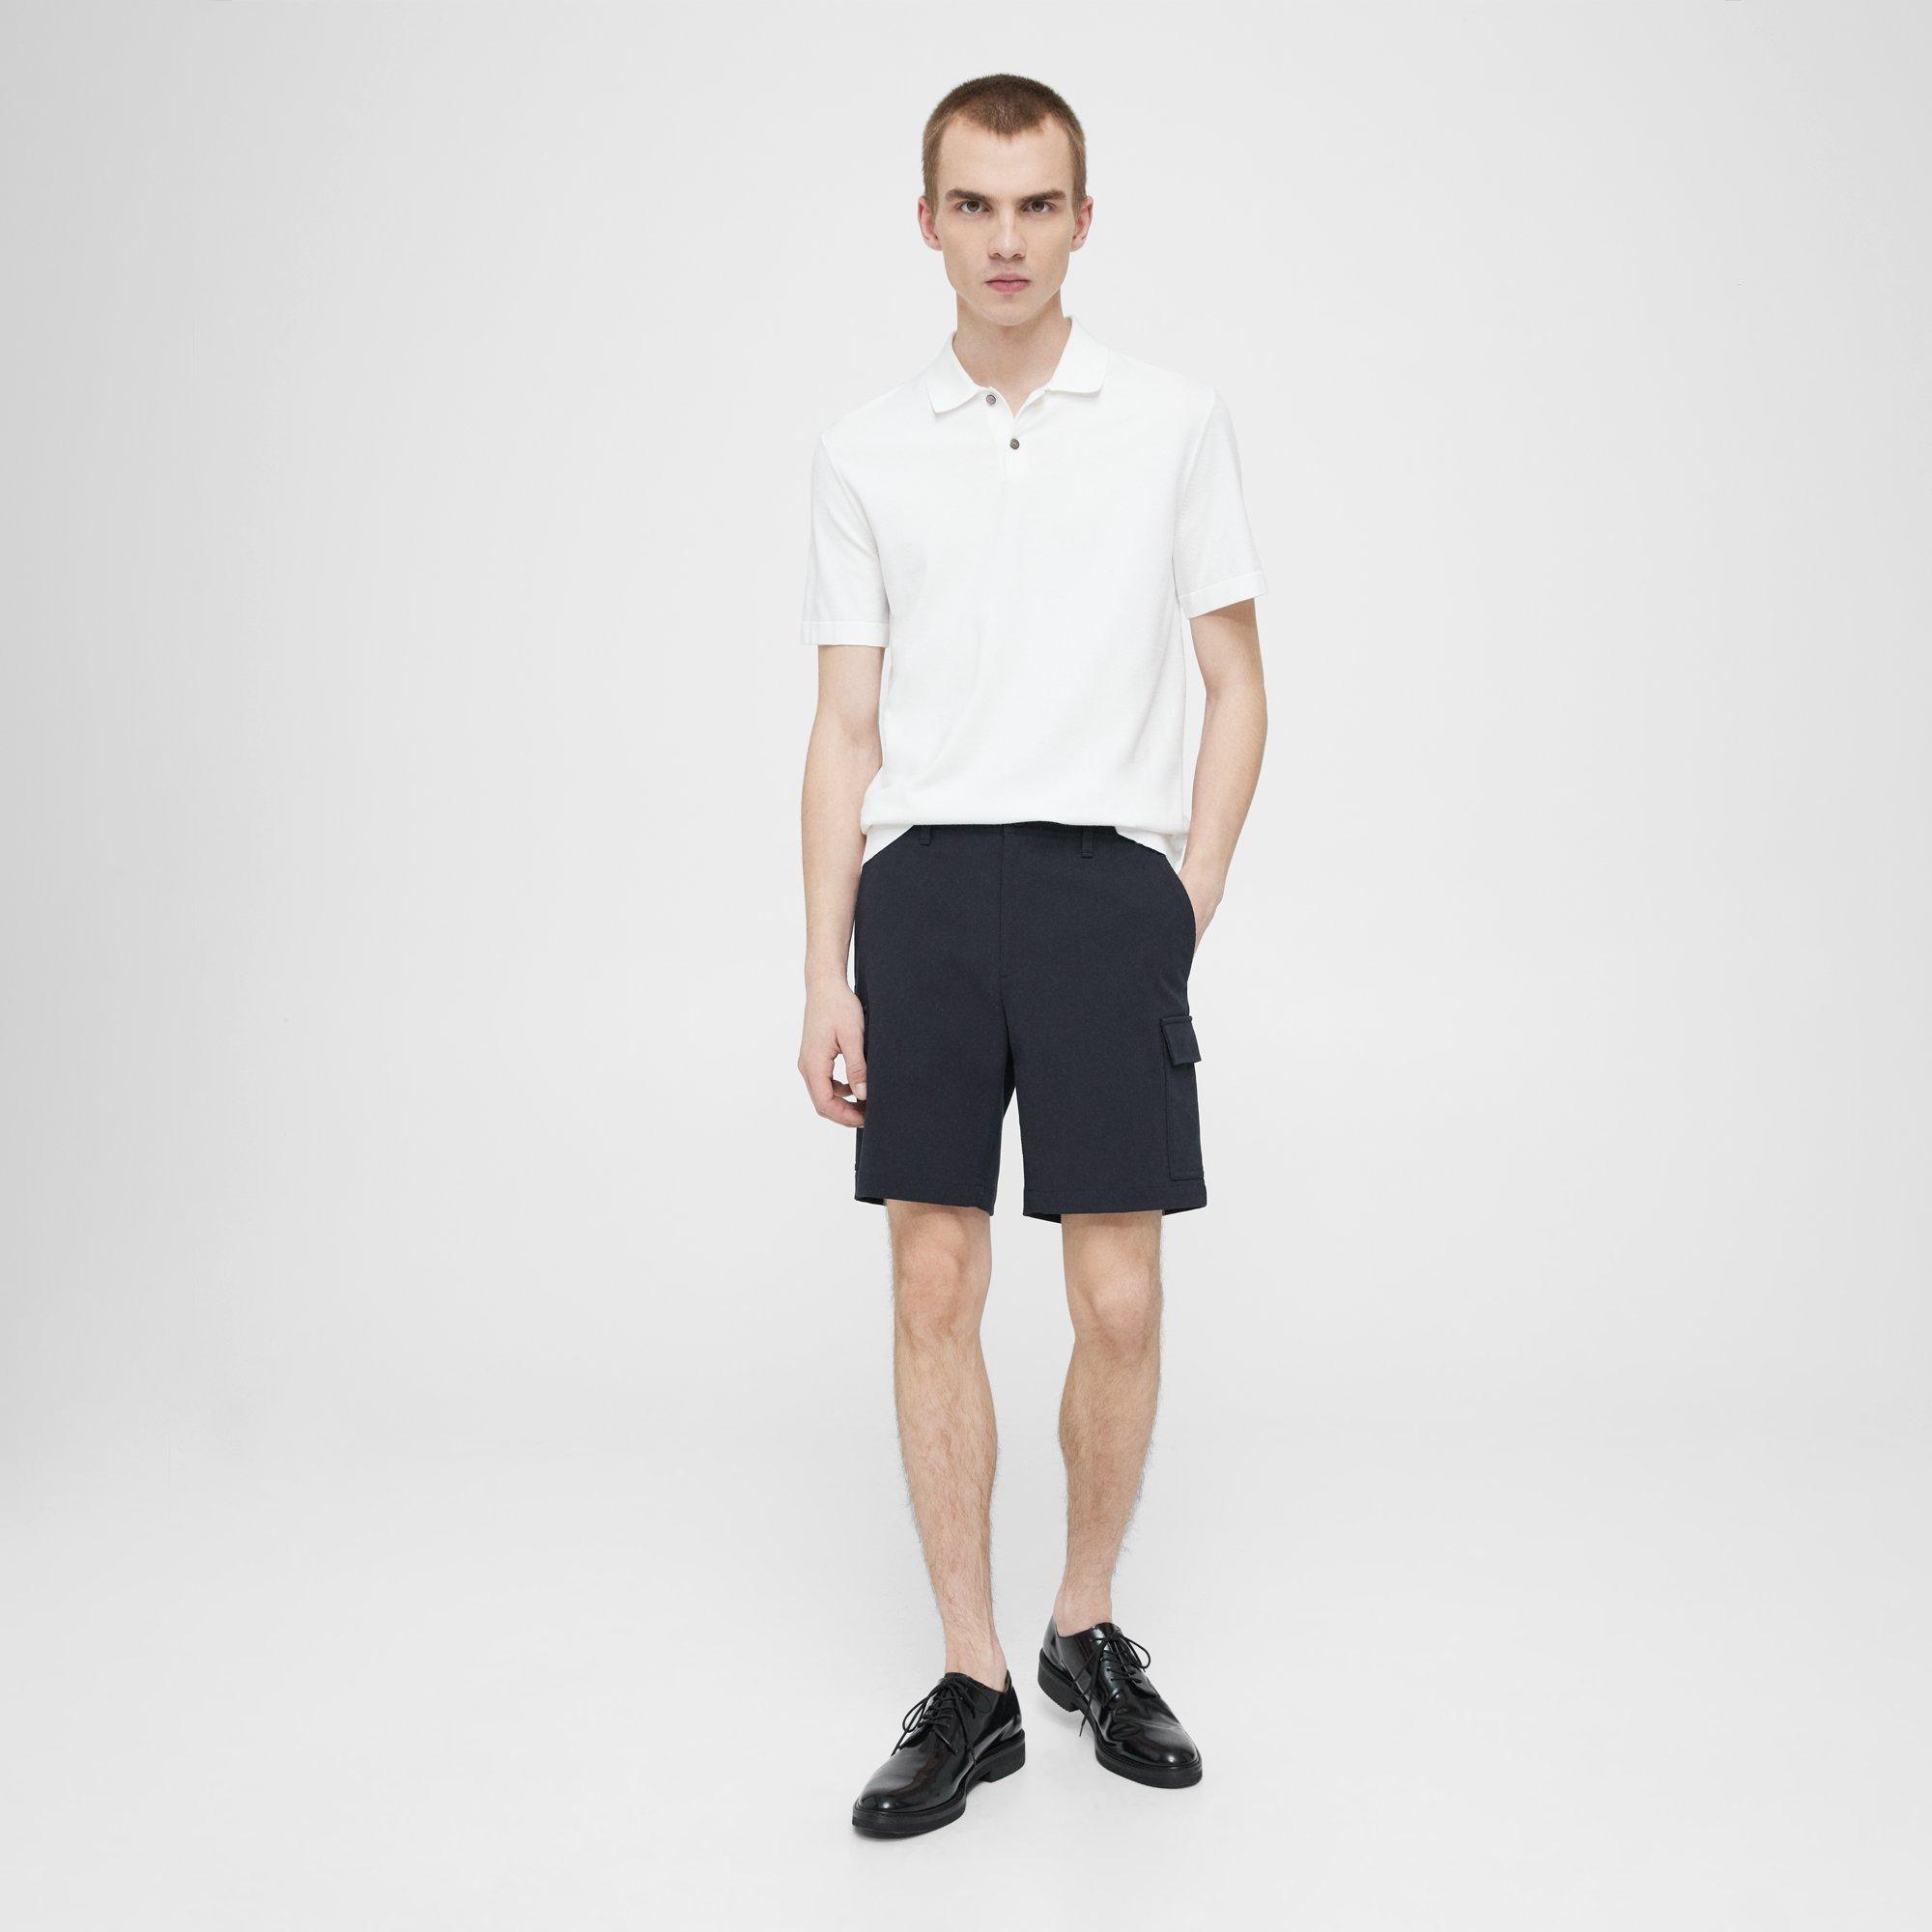 Theory Zaine Cargo Short in Neoteric Twill